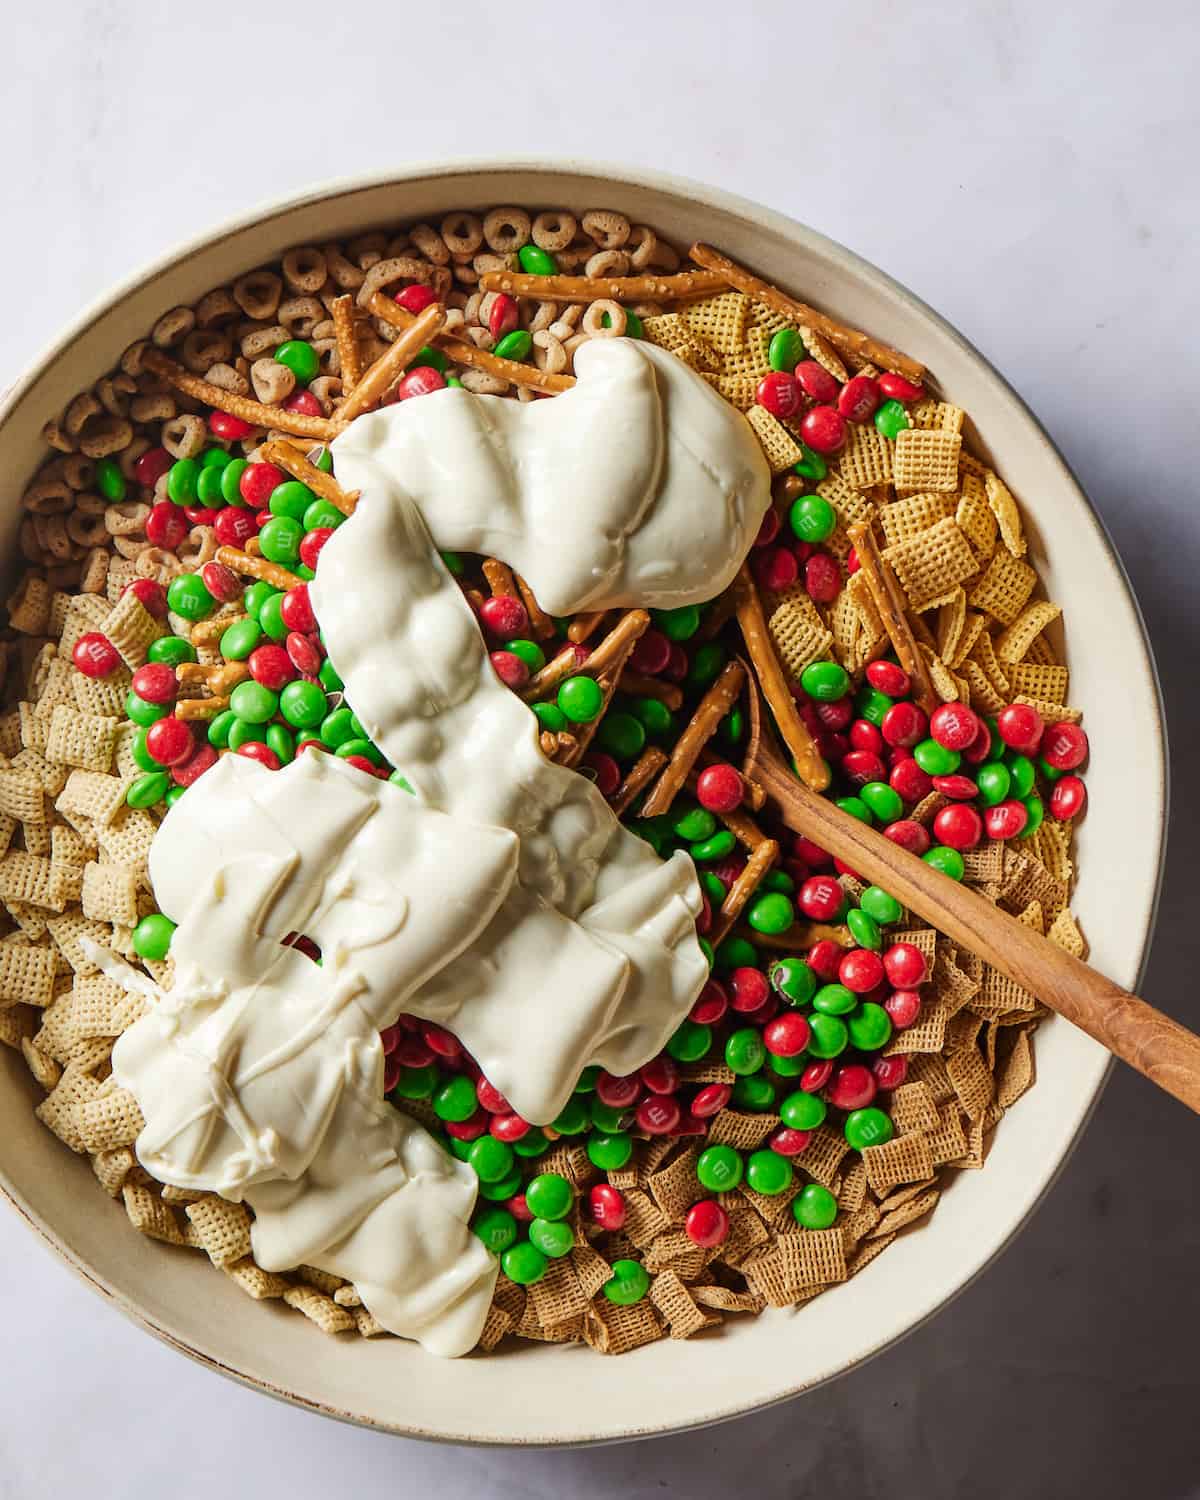 A large white round bowl with corn chex, wheat chex, rice chex, cheerios and pretzel sticks plus red and green M&Ms in it, topped with molten white chocolate drizzled on top and a wooden spoon.